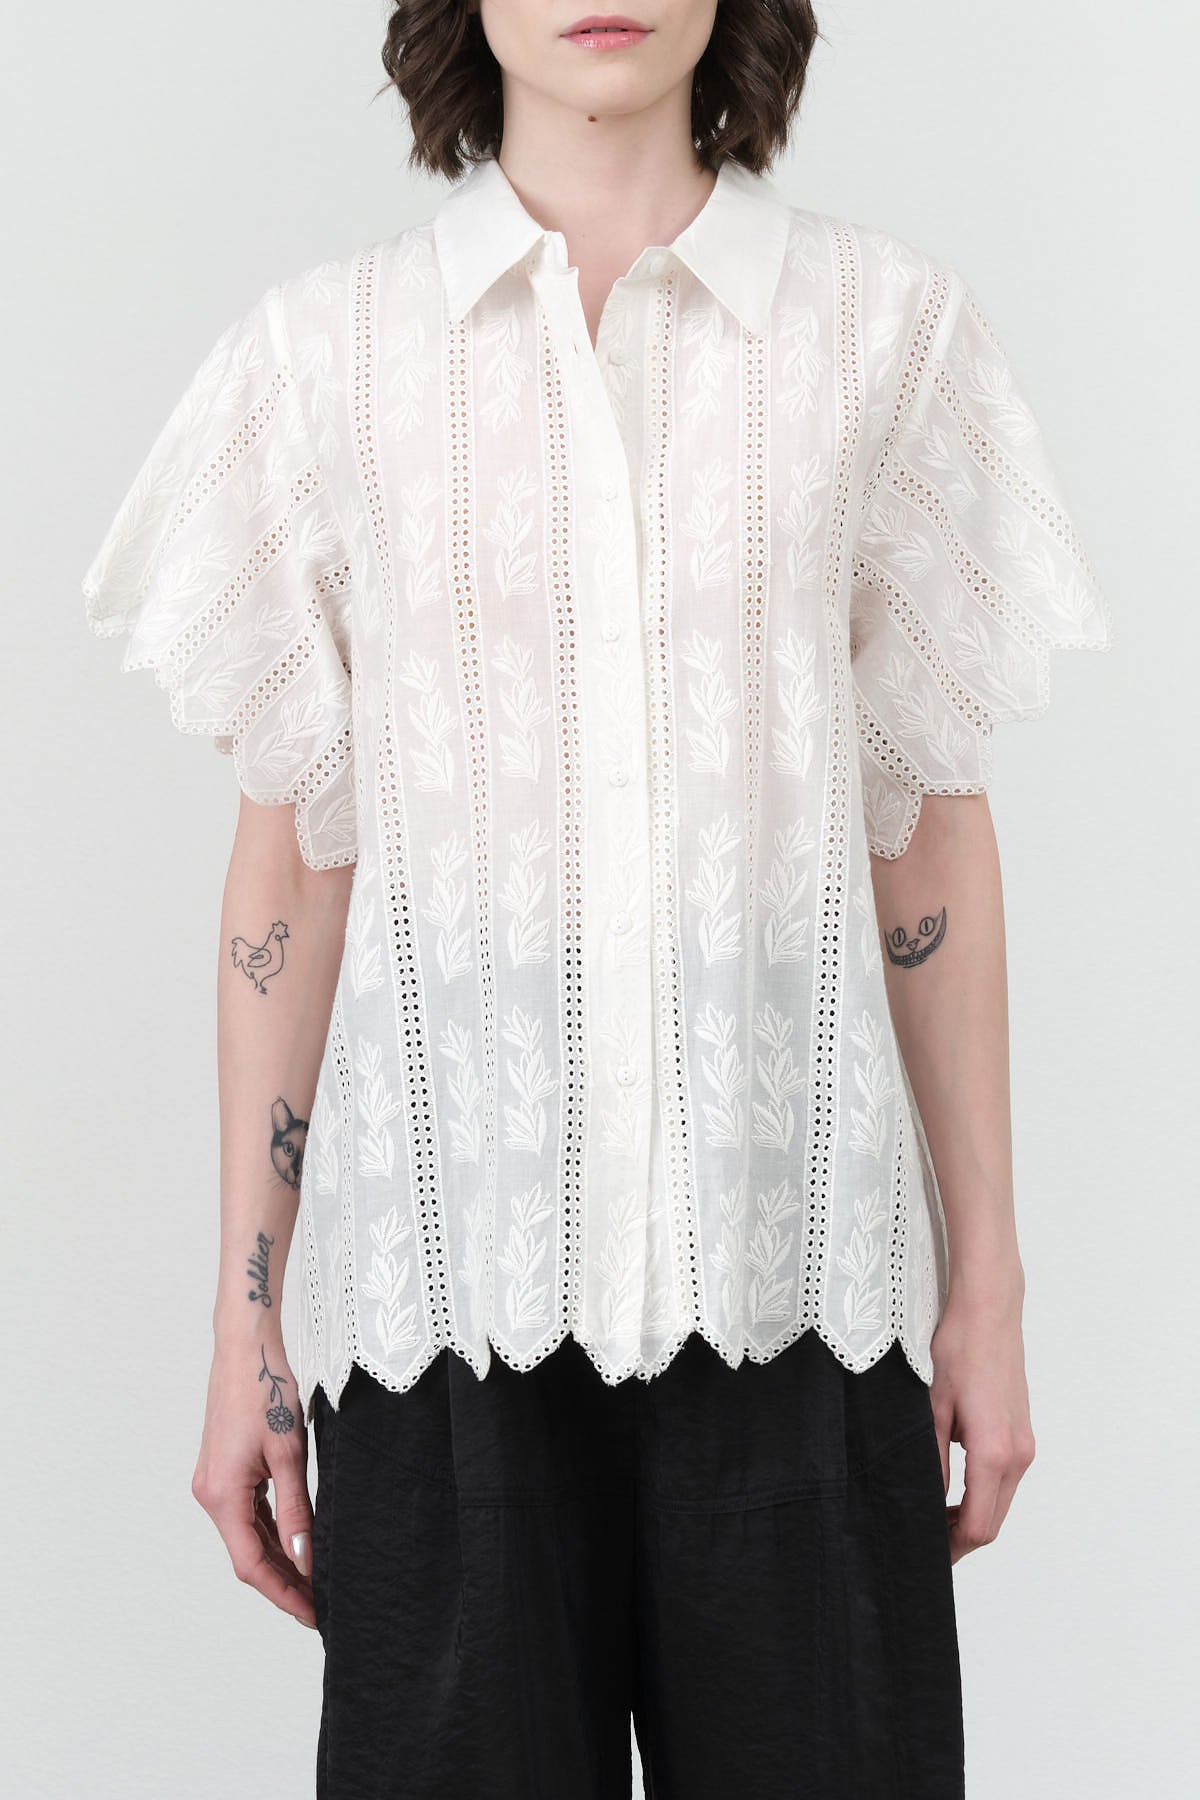 Harbour Blouse by Mirth in White Vine Eyelet